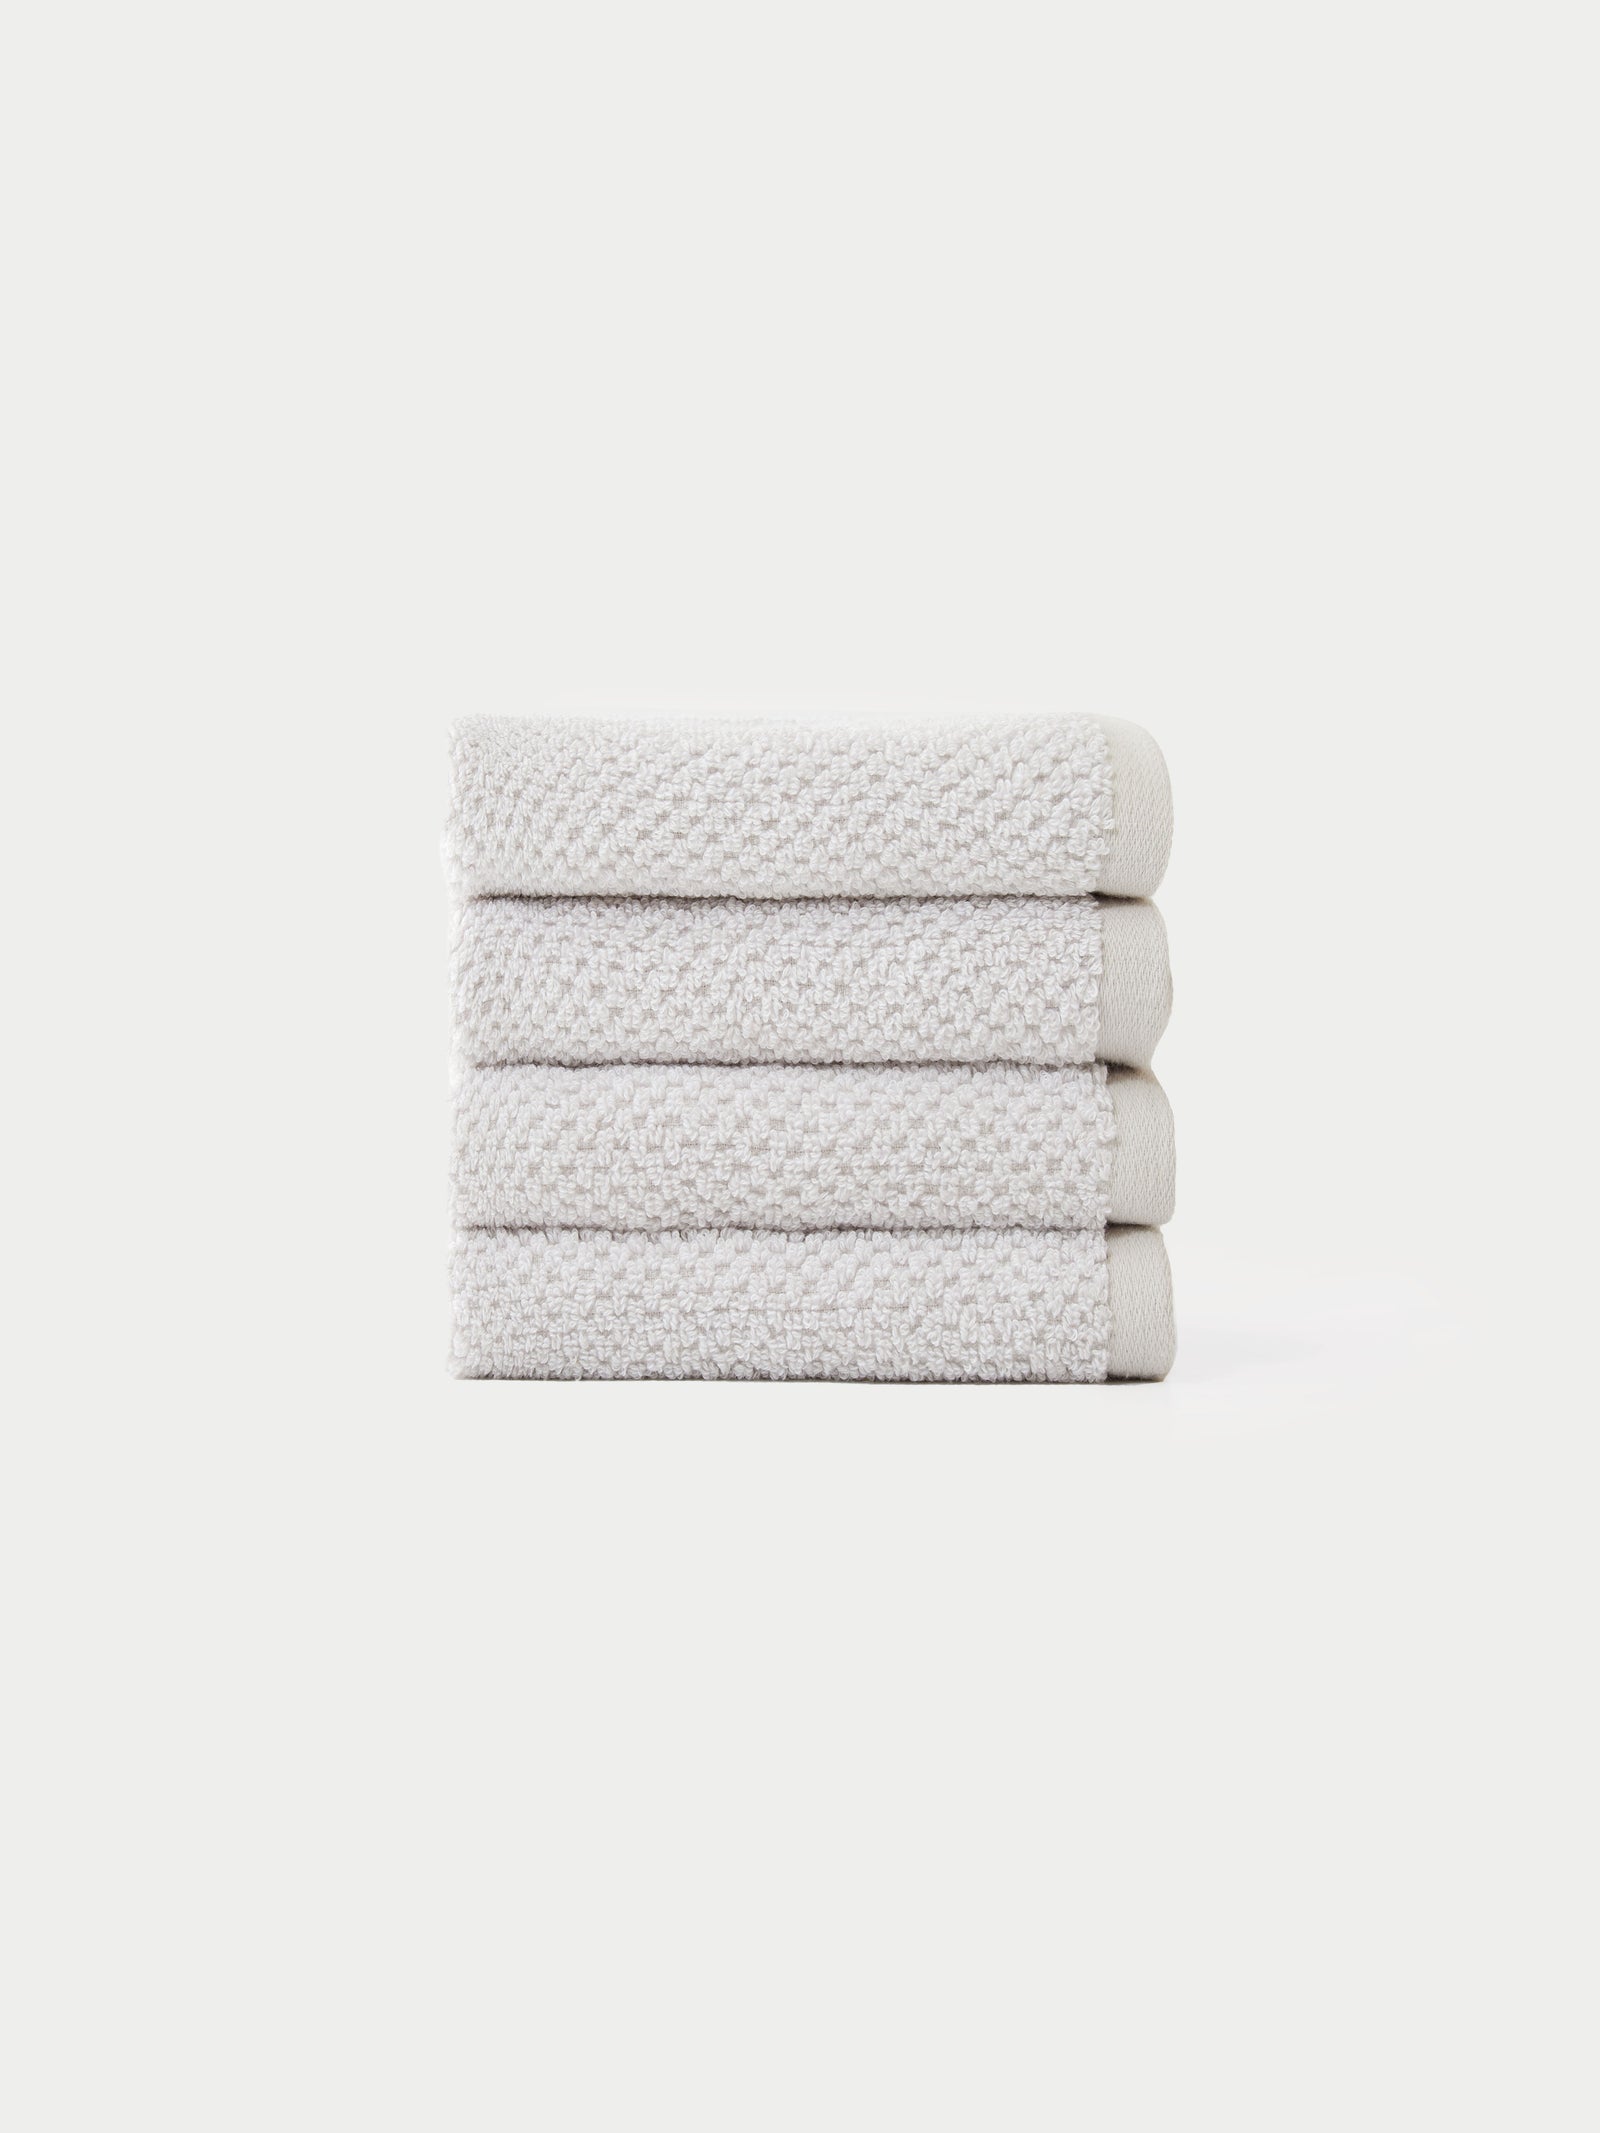 Nantucket Wash Cloths in the color Heathered Light Grey. The Wash Cloths are neatly folded. The photo of the wash cloths was taken with a white background.